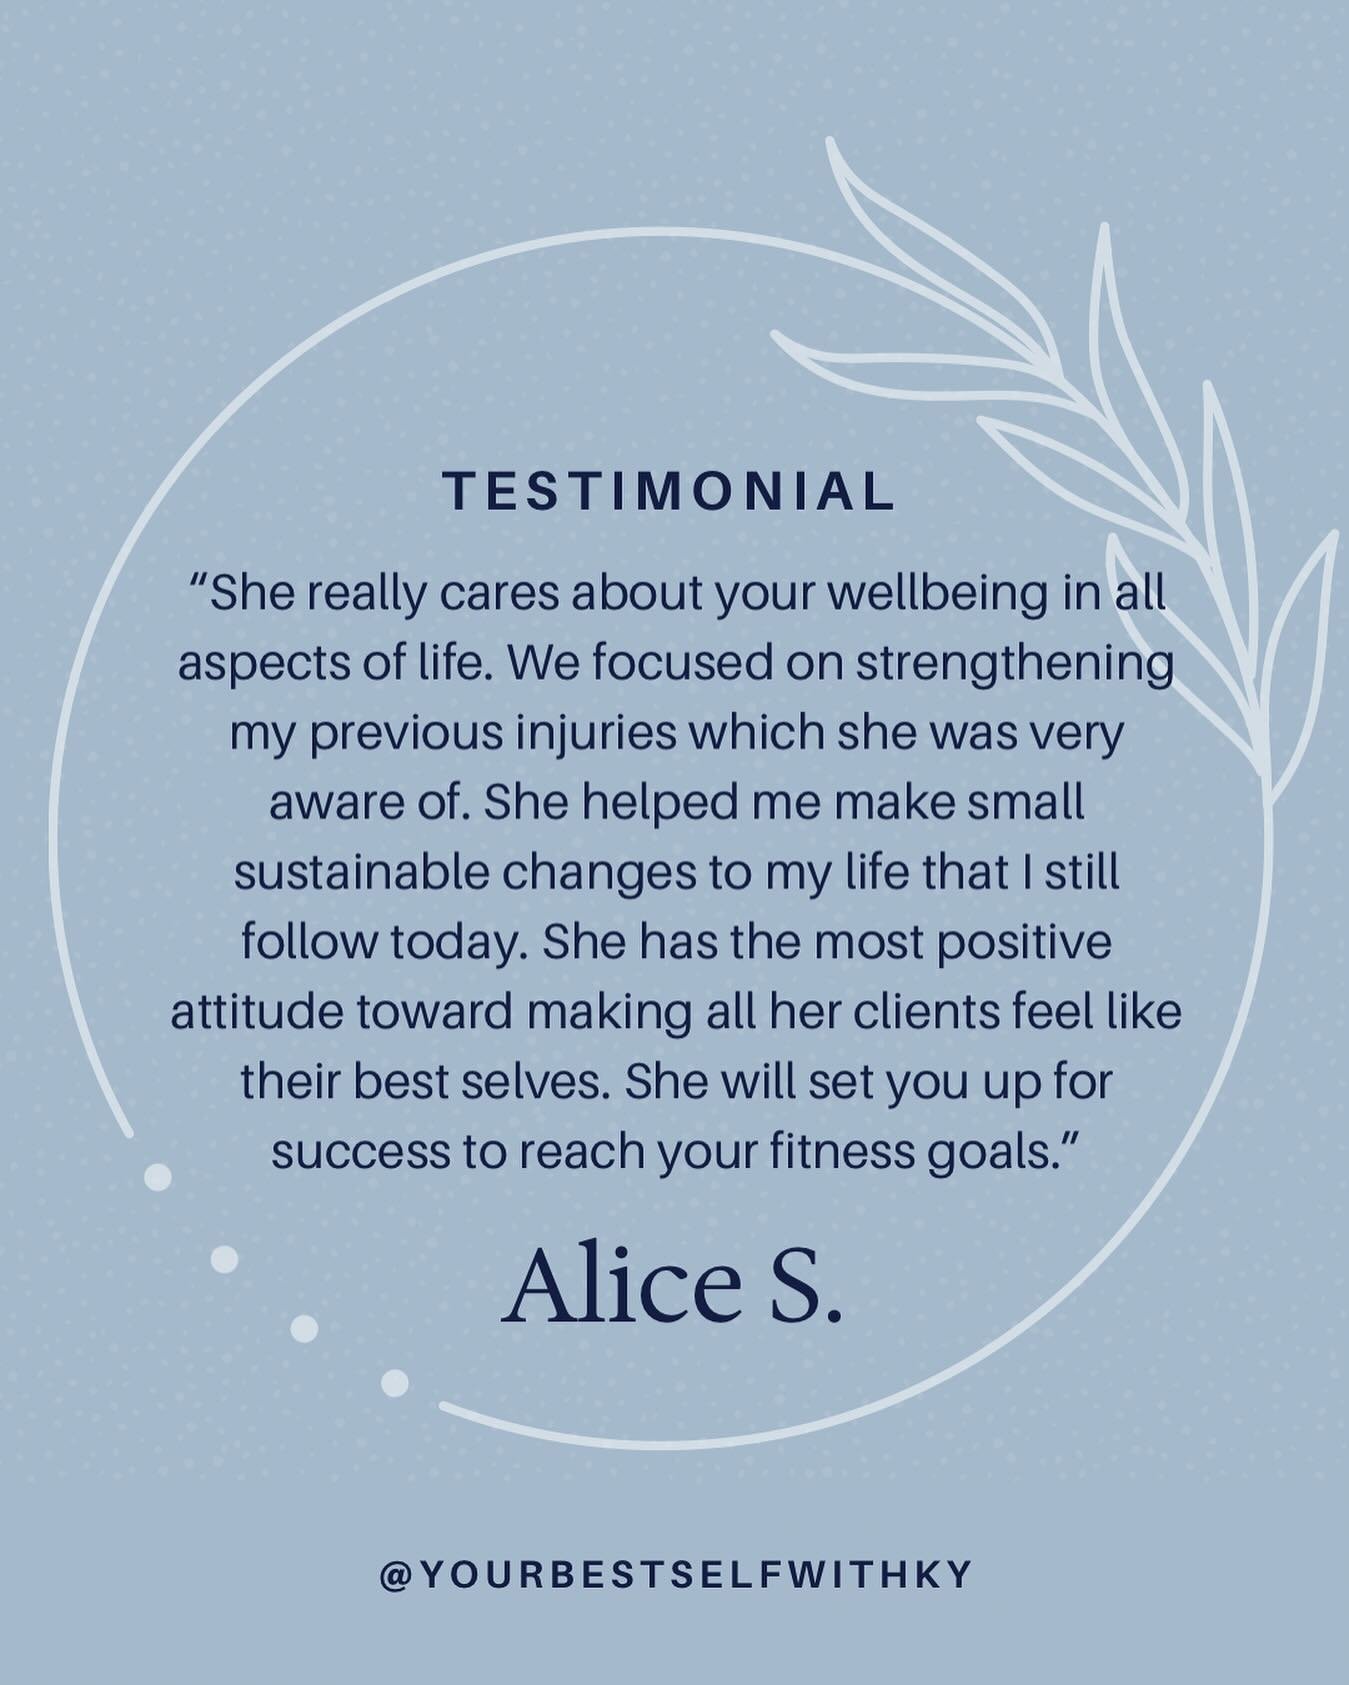 Client Success 🙌🏼

Alice trained with me for over a year and let me tell you - this girl knows the importance of movement and putting herself first. Alice dealt with a lot of 𝘤𝘩𝘳𝘰𝘯𝘪𝘤 𝘱𝘢𝘪𝘯. She seen first hand what a well designed strengt